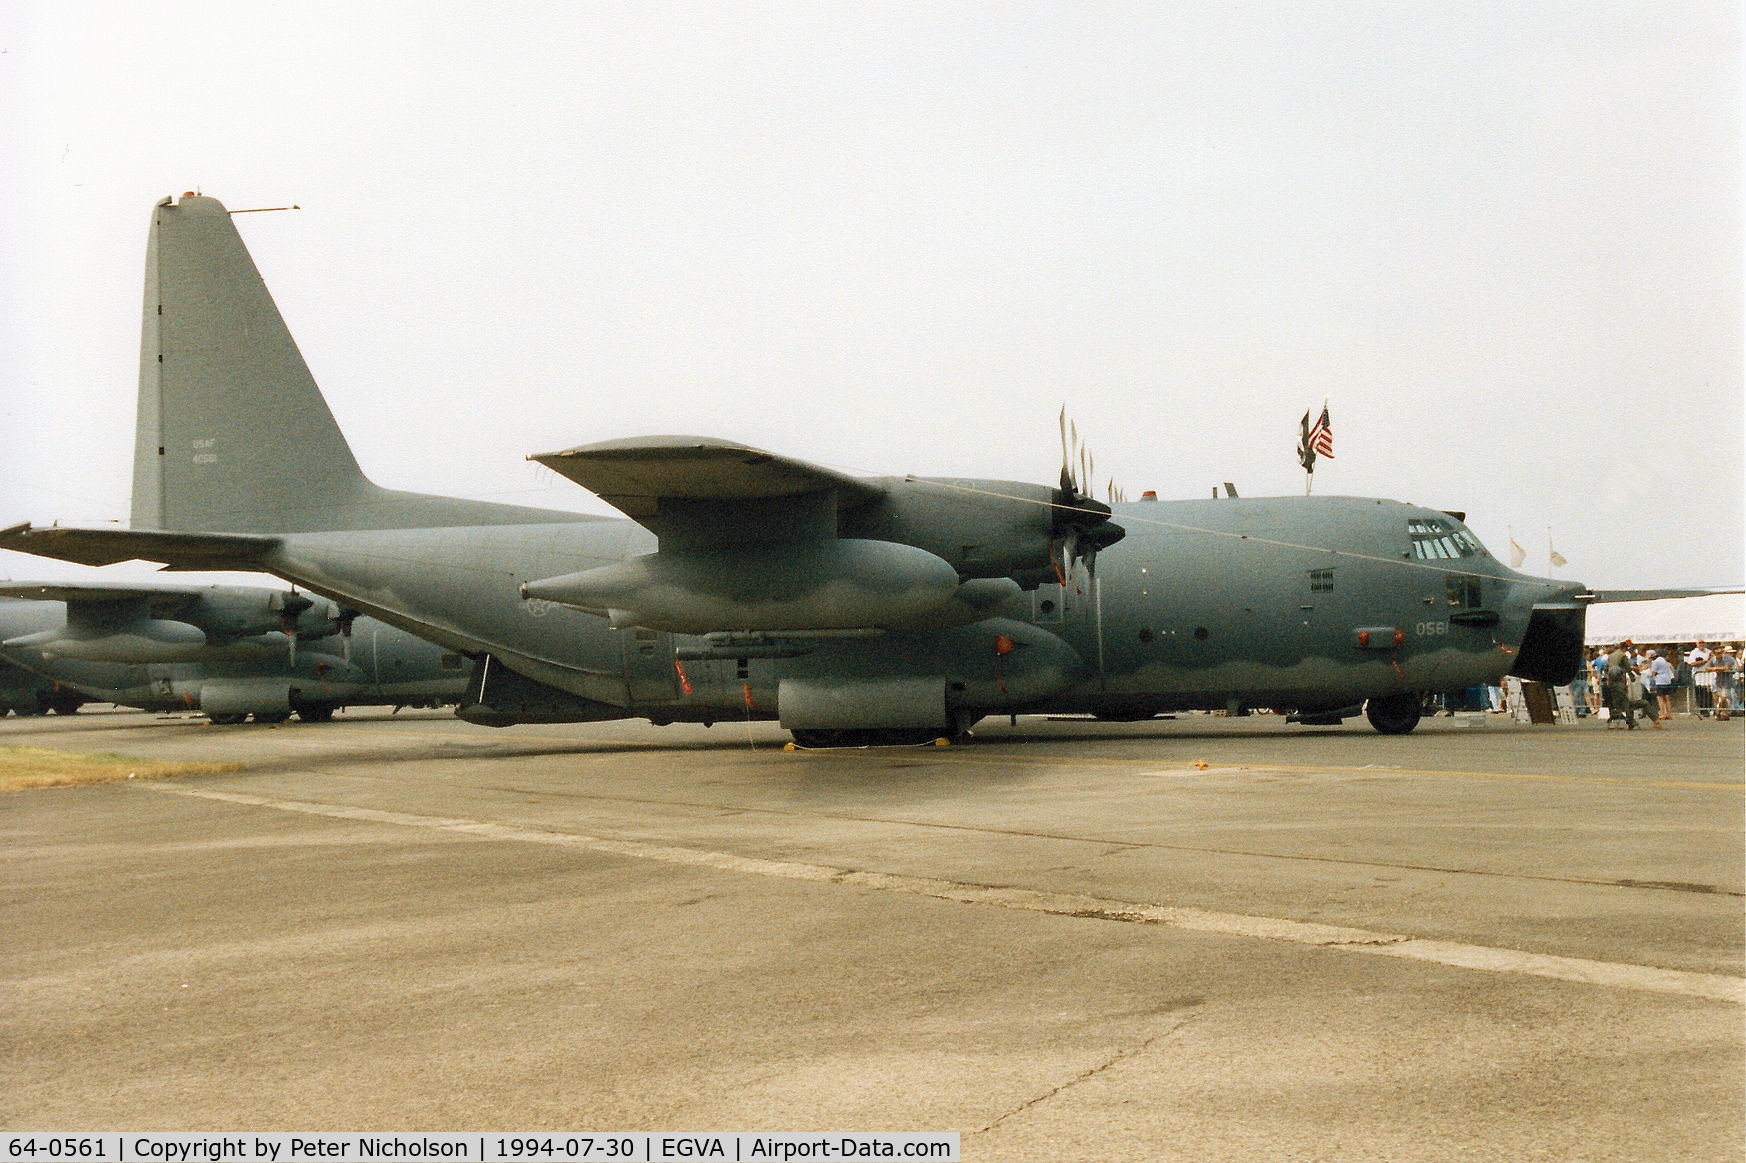 64-0561, 1964 Lockheed MC-130E Hercules C/N 382-4065, MC-130E Combat Talon 1, named Lucky 7, of 8th Special Operations Squadron on display at the 1994 Intnl Air Tattoo at RAF Fairford.